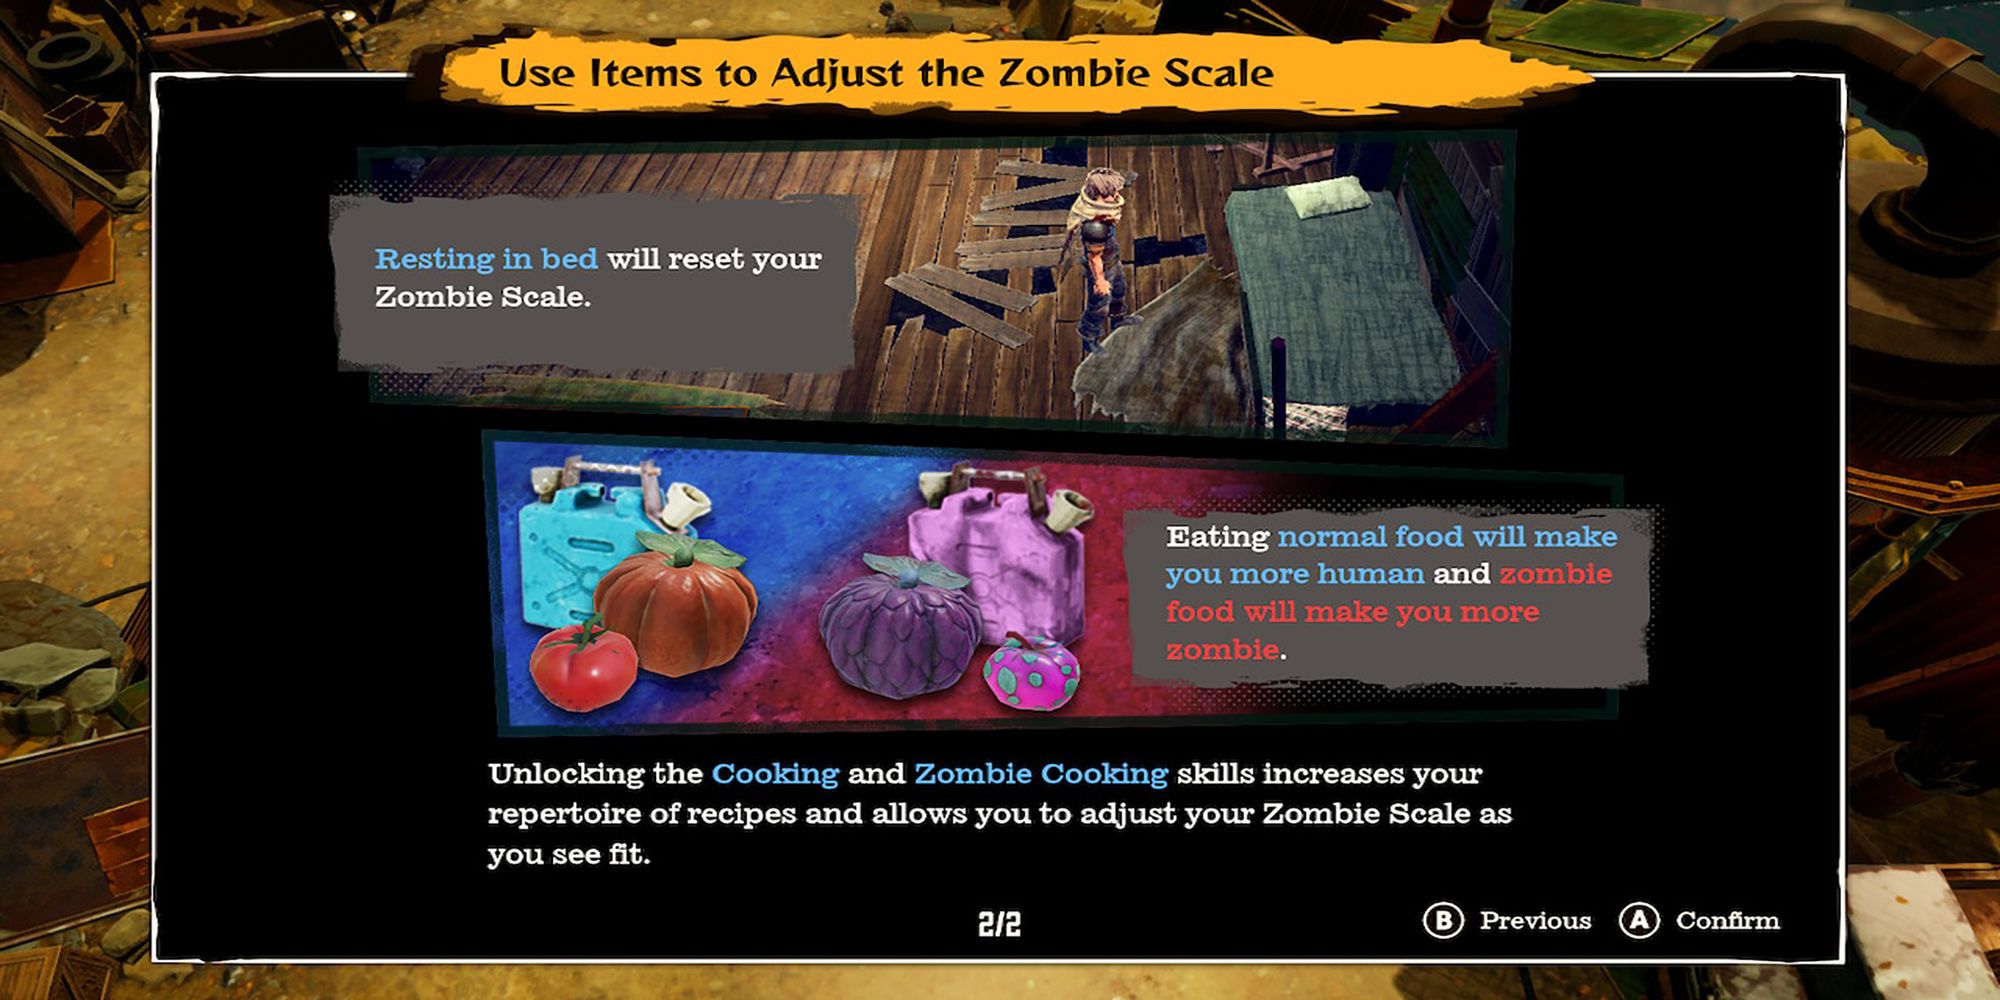 This tutorial teaches how items can adjust the zombie scale in Deadcraft.